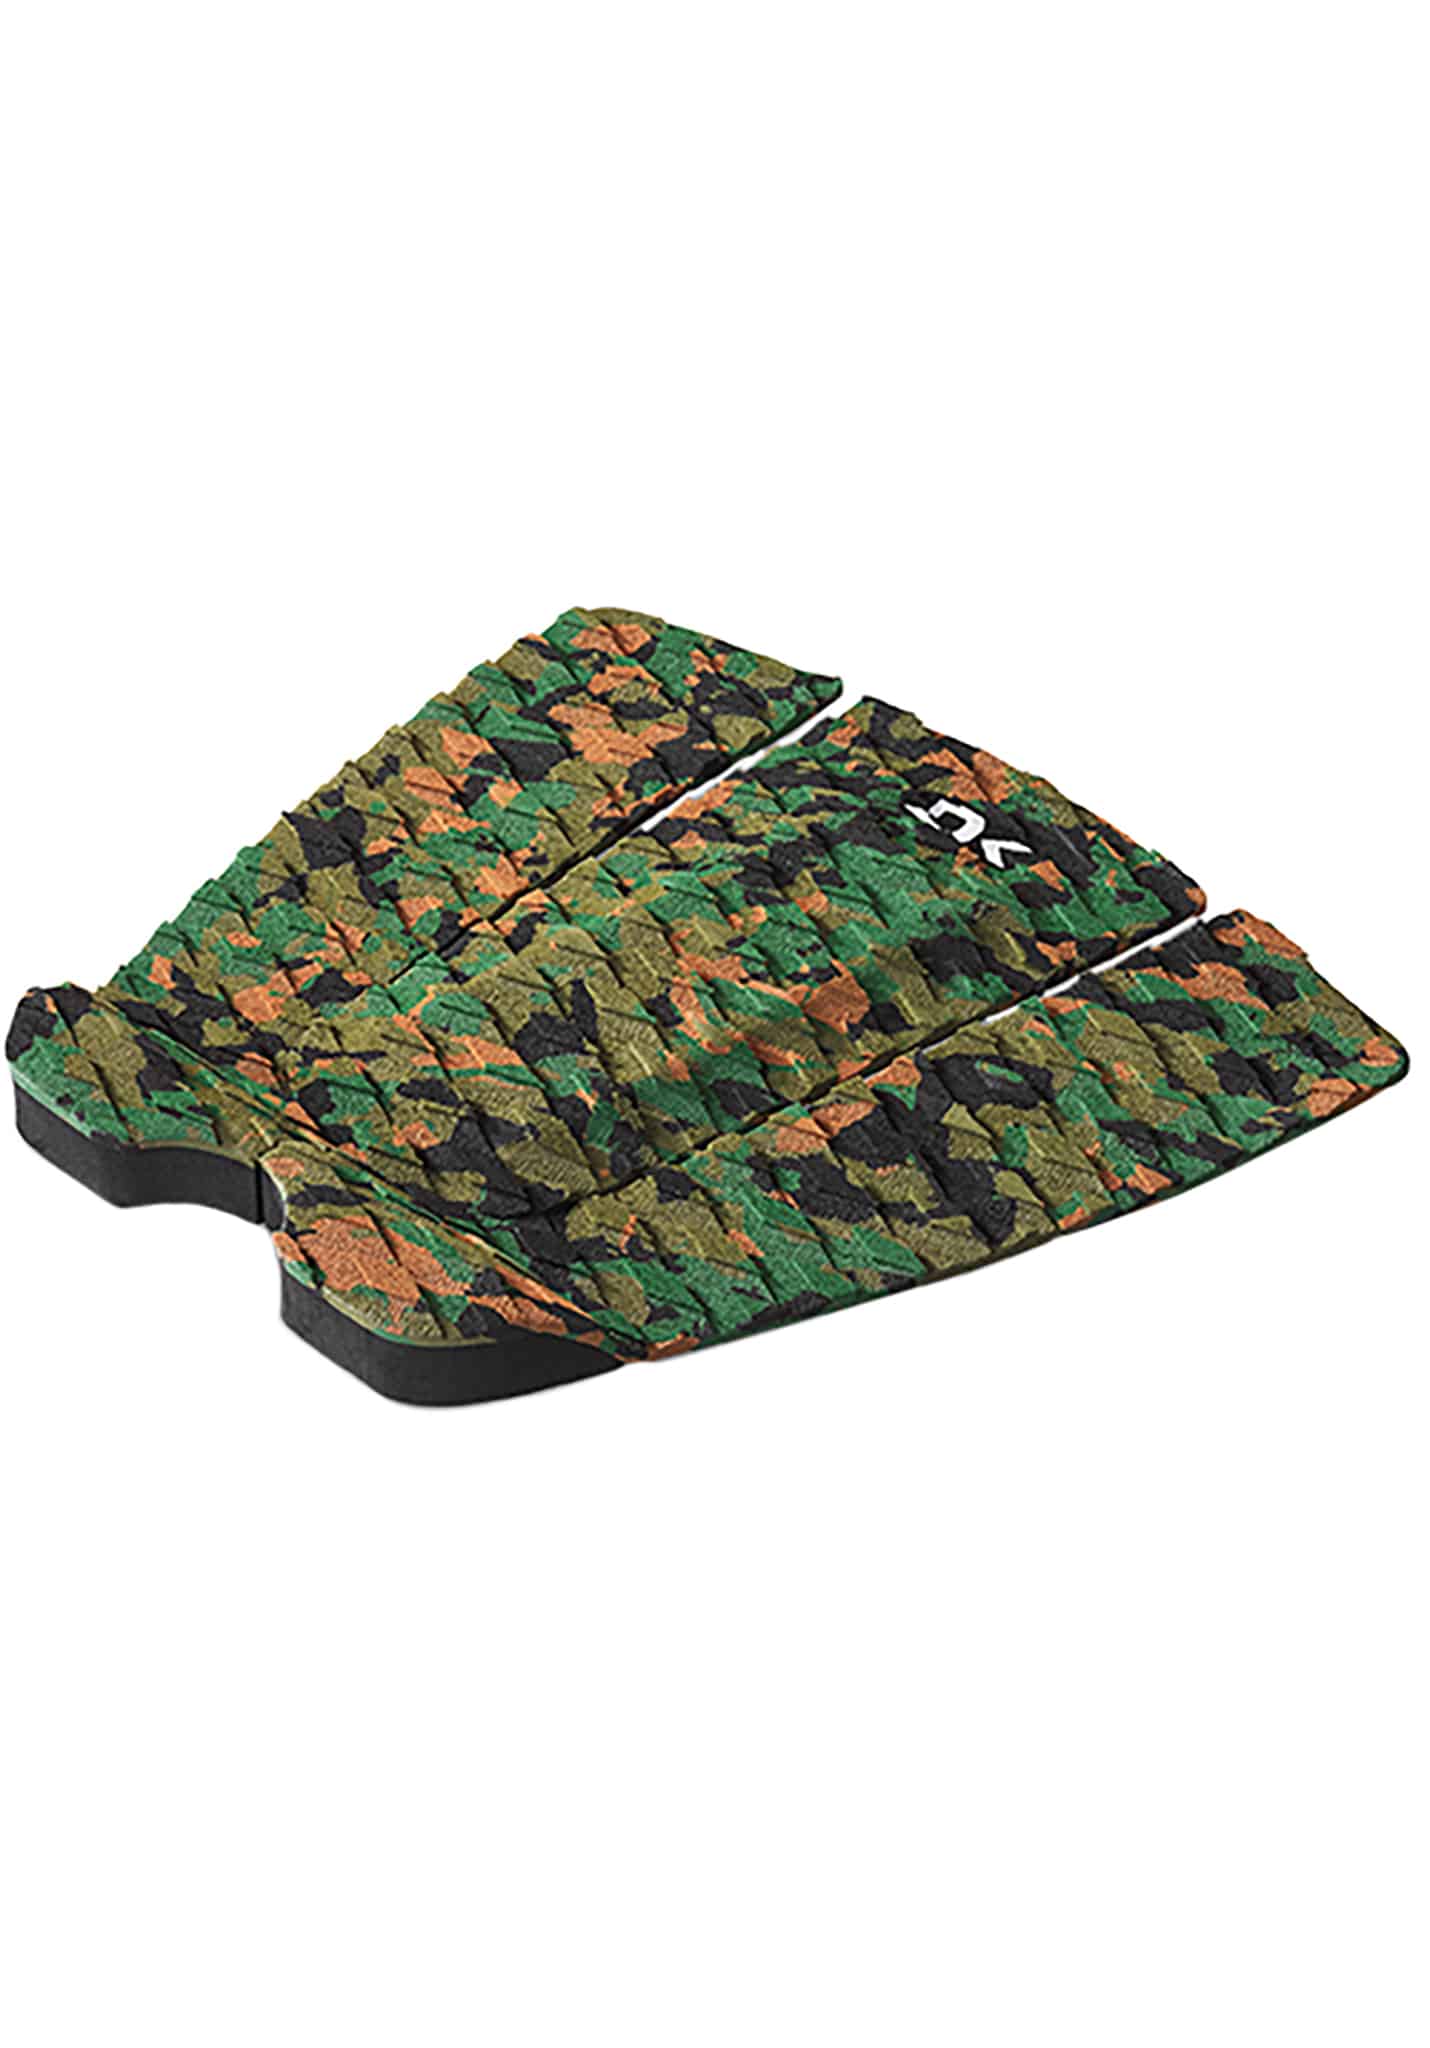 Dakine Andy Irons Pro Surf Pads olive camo One Size